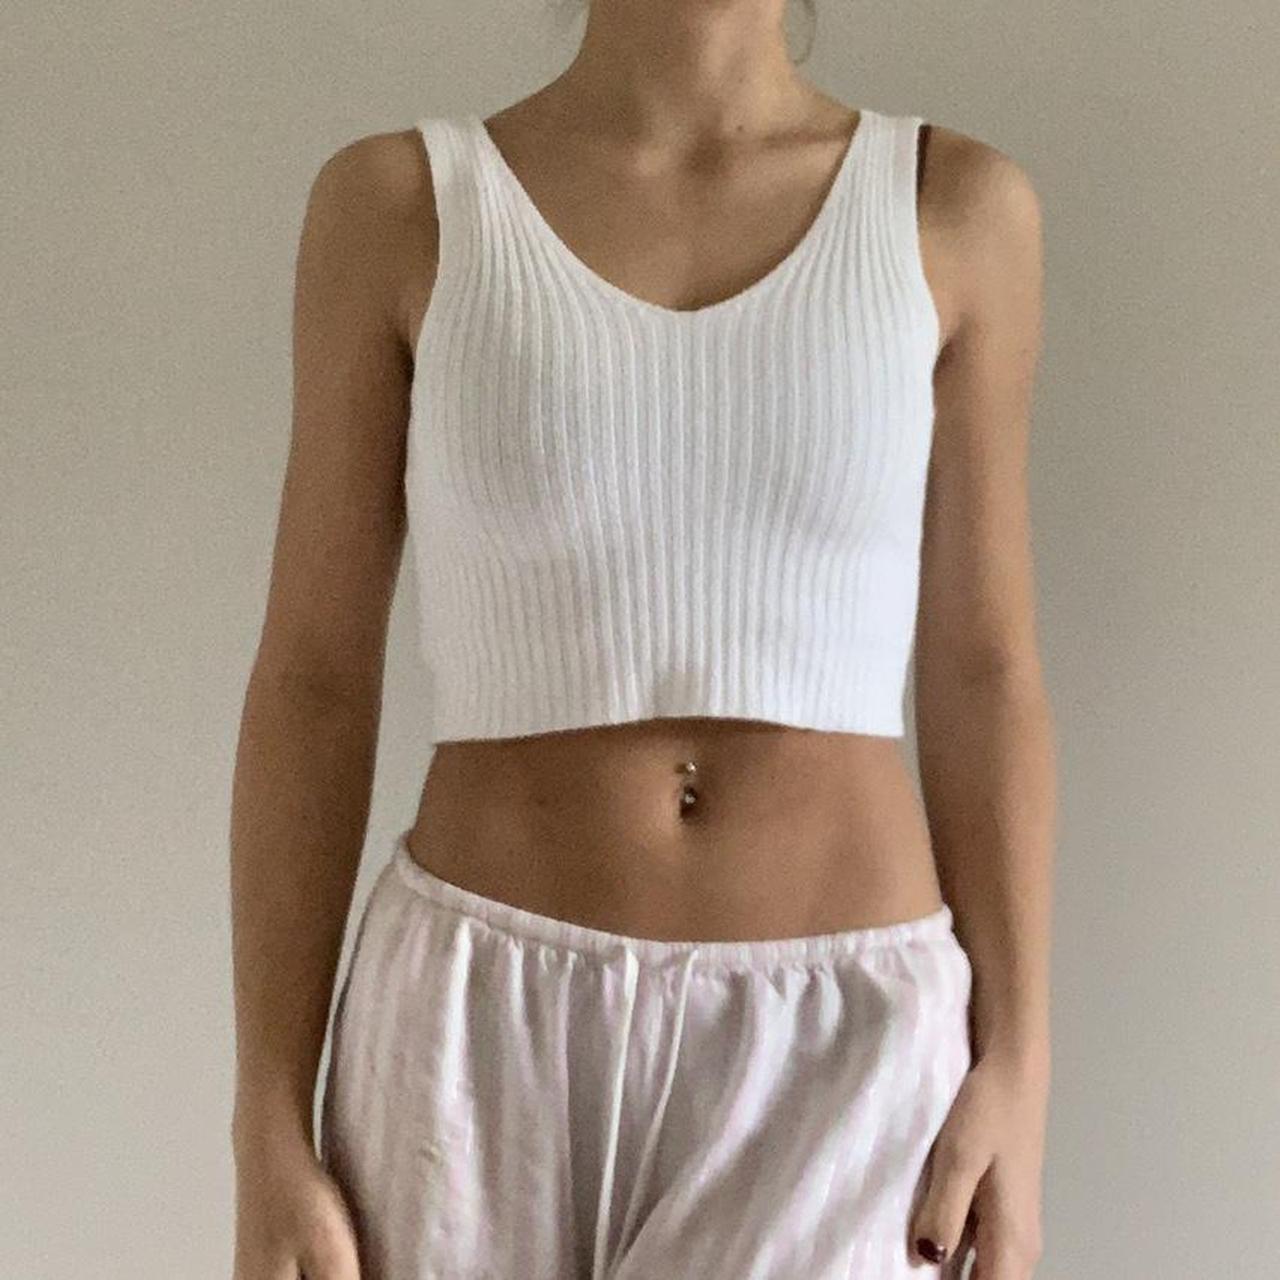 white knit tank top from Brandy Melville, no tag - Depop